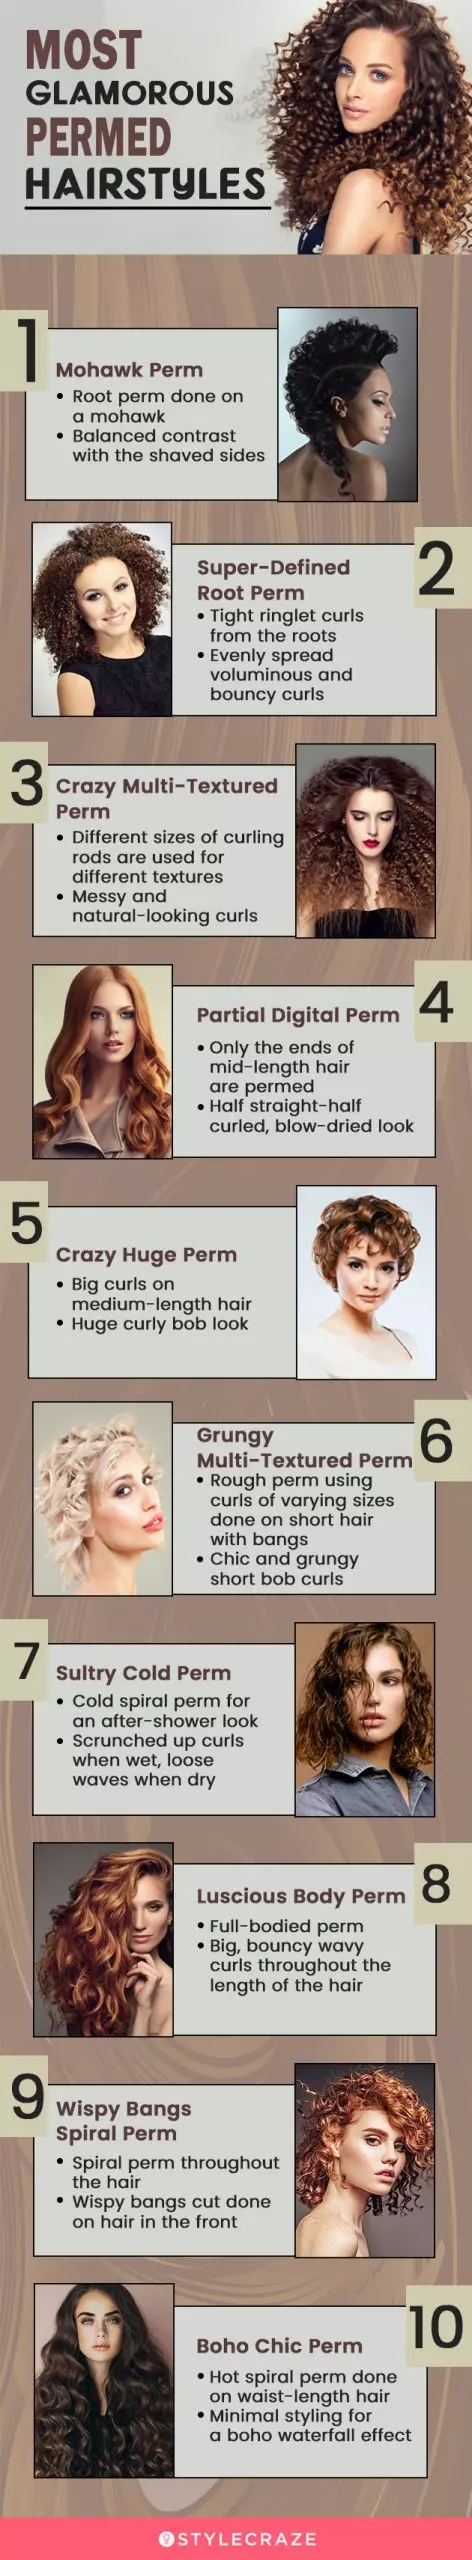 most glamorous permed hairstyles (infographic)